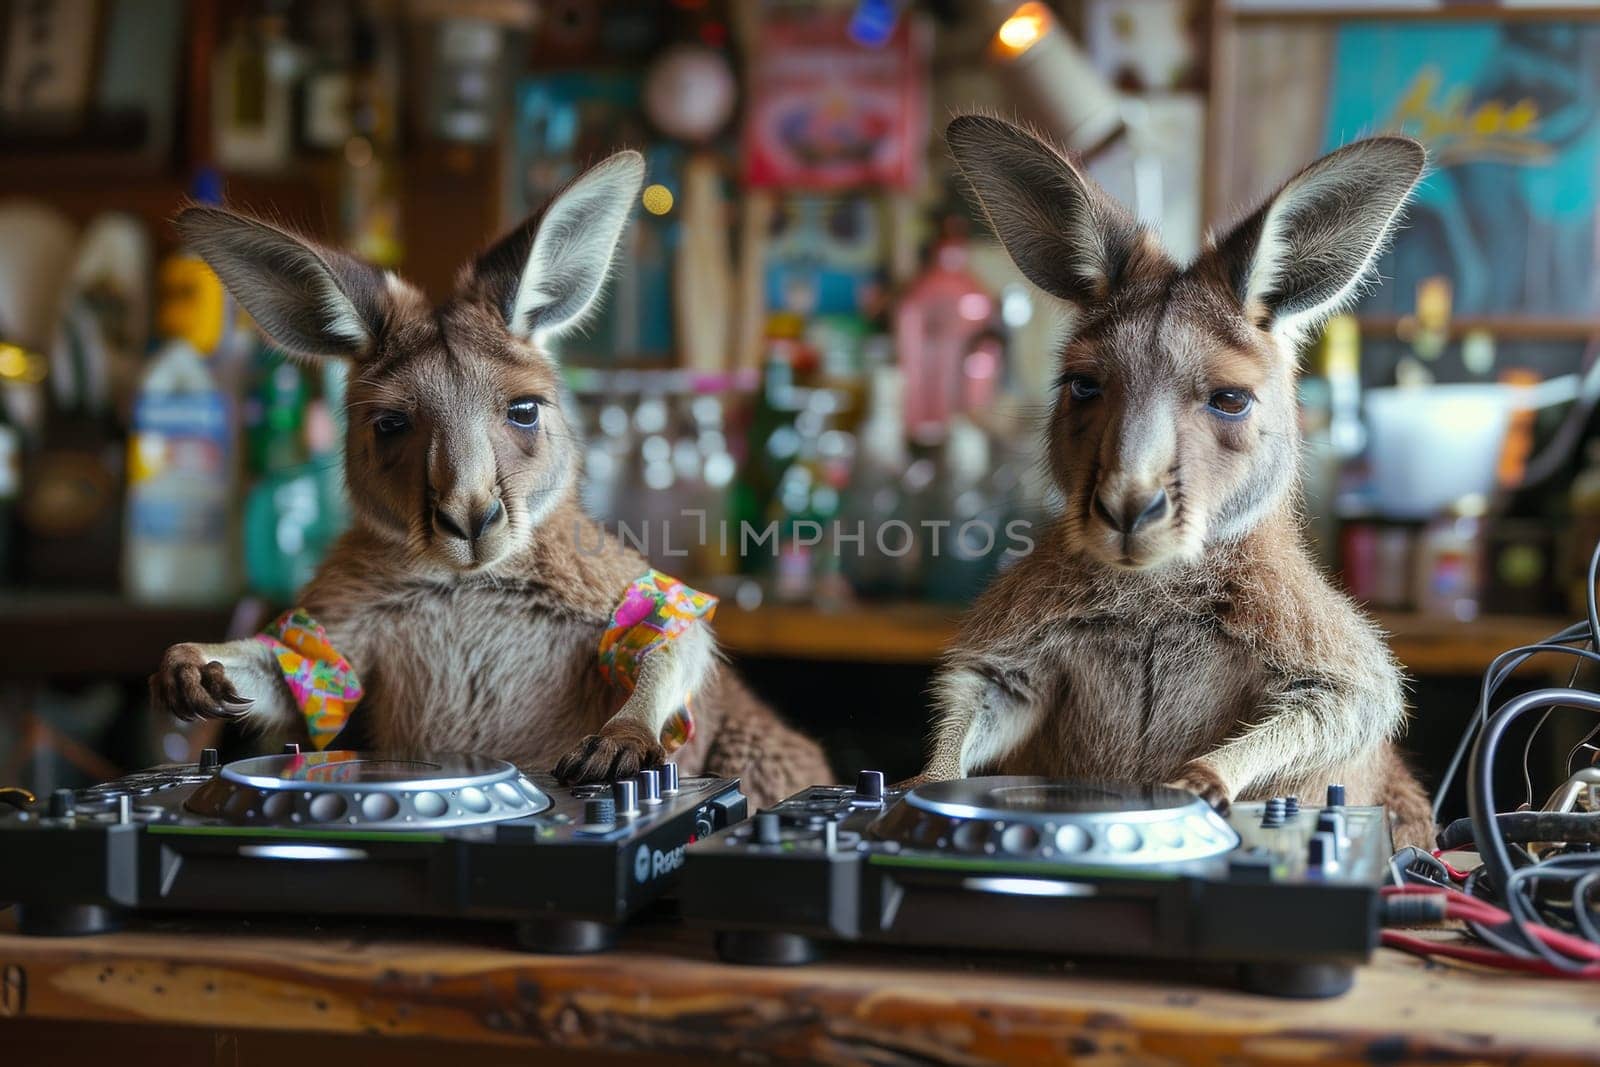 A kangaroo is playing a DJ set by itchaznong